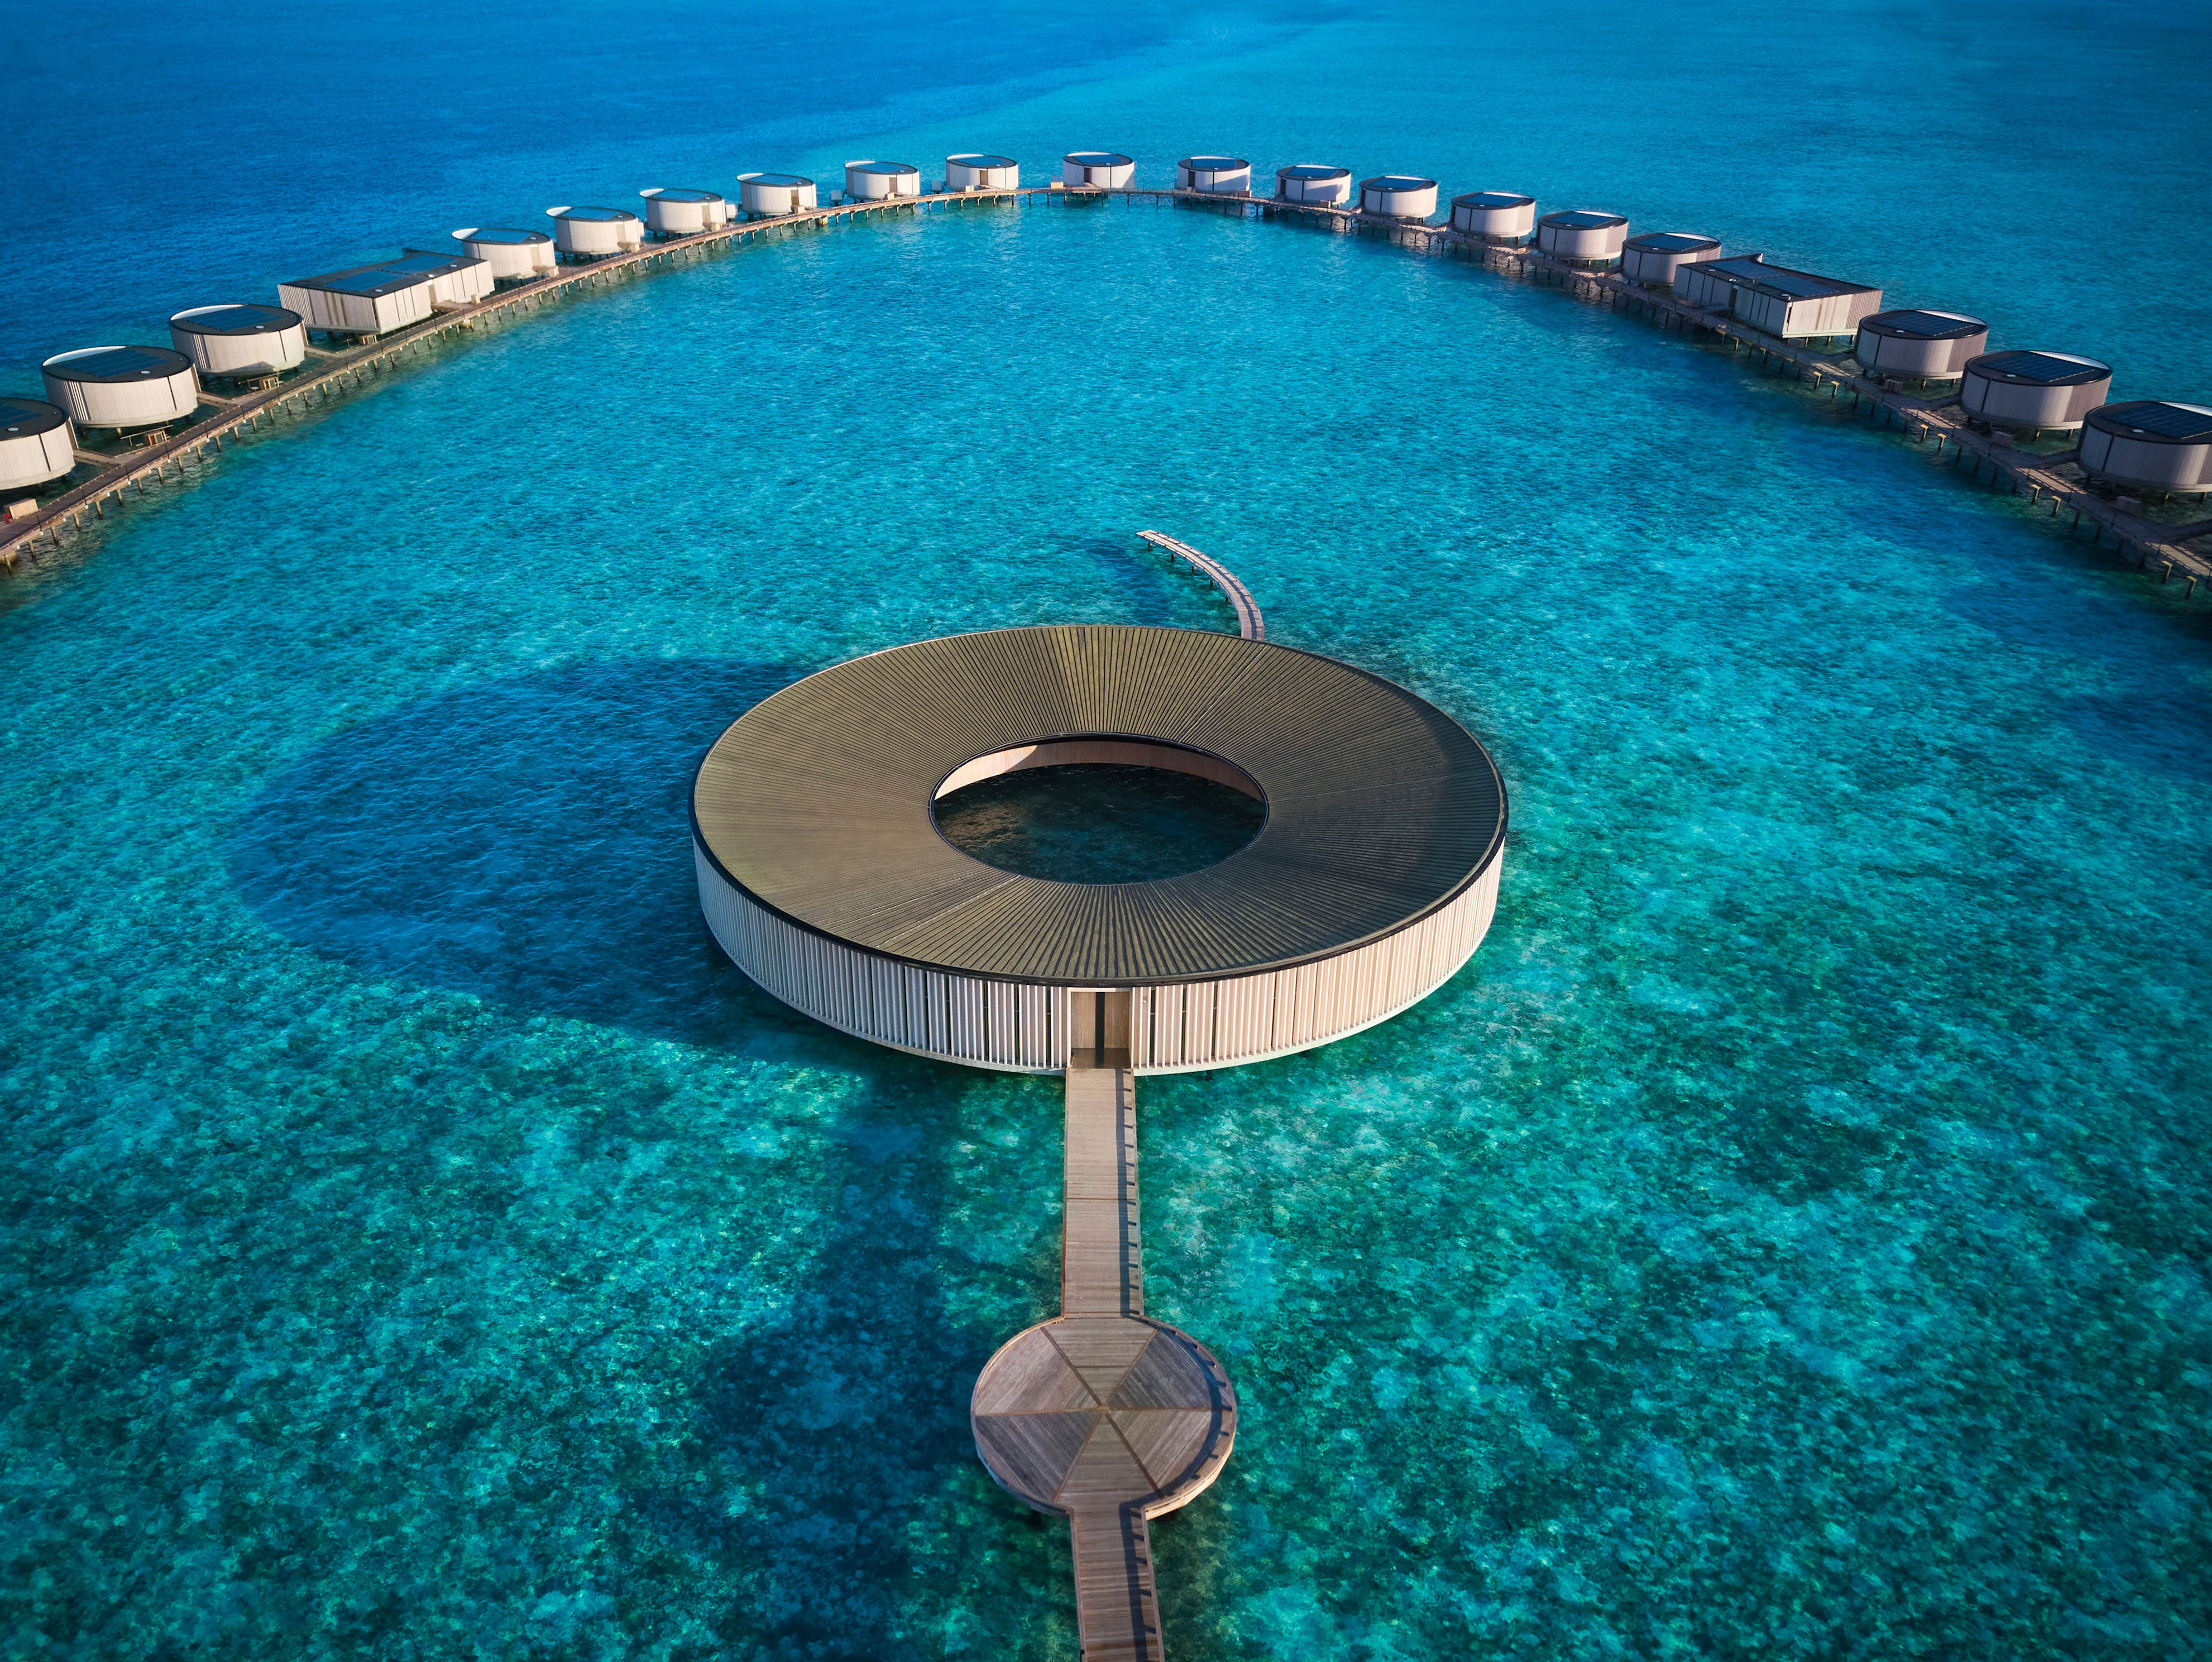 <p>The <a href="https://www.architecturaldigest.com/story/the-maldives-design-moment?mbid=synd_msn_rss&utm_source=msn&utm_medium=syndication">Maldives</a> is famous for top-notch resorts that make the most of their stunning settings via dreamy <a href="https://www.architecturaldigest.com/gallery/overwater-villas?mbid=synd_msn_rss&utm_source=msn&utm_medium=syndication">overwater bungalows and villas</a>. To best showcase its star amenity, the vibrant blue lagoon, <a href="https://www.ritzcarlton.com/en/hotels/mlera-the-ritz-carlton-maldives-fari-islands/overview/">The Ritz-Carlton Maldives, Fari Islands</a> enlisted Kerry Hill Studios to construct a floating timber-lined, ring-shaped spa retreat, accessed via an open-air walkway. Inside the circular spa are nine treatment rooms, a salon, and a relaxation room, where guests can enjoy massages and facials while the turquoise waters around them no doubt offer an extra splash of tranquility.</p> <div class="callout"><p><a href="https://www.expedia.com/The-Ritz-Carlton.h58998476.Hotel-Information" title="Book now at Expedia.com">Book now at Expedia.com</a></p> </div><p>Sign up for our newsletter to get the latest in design, decorating, celebrity style, shopping, and more.</p><a href="https://www.architecturaldigest.com/newsletter/subscribe?sourceCode=msnsend">Sign Up Now</a>